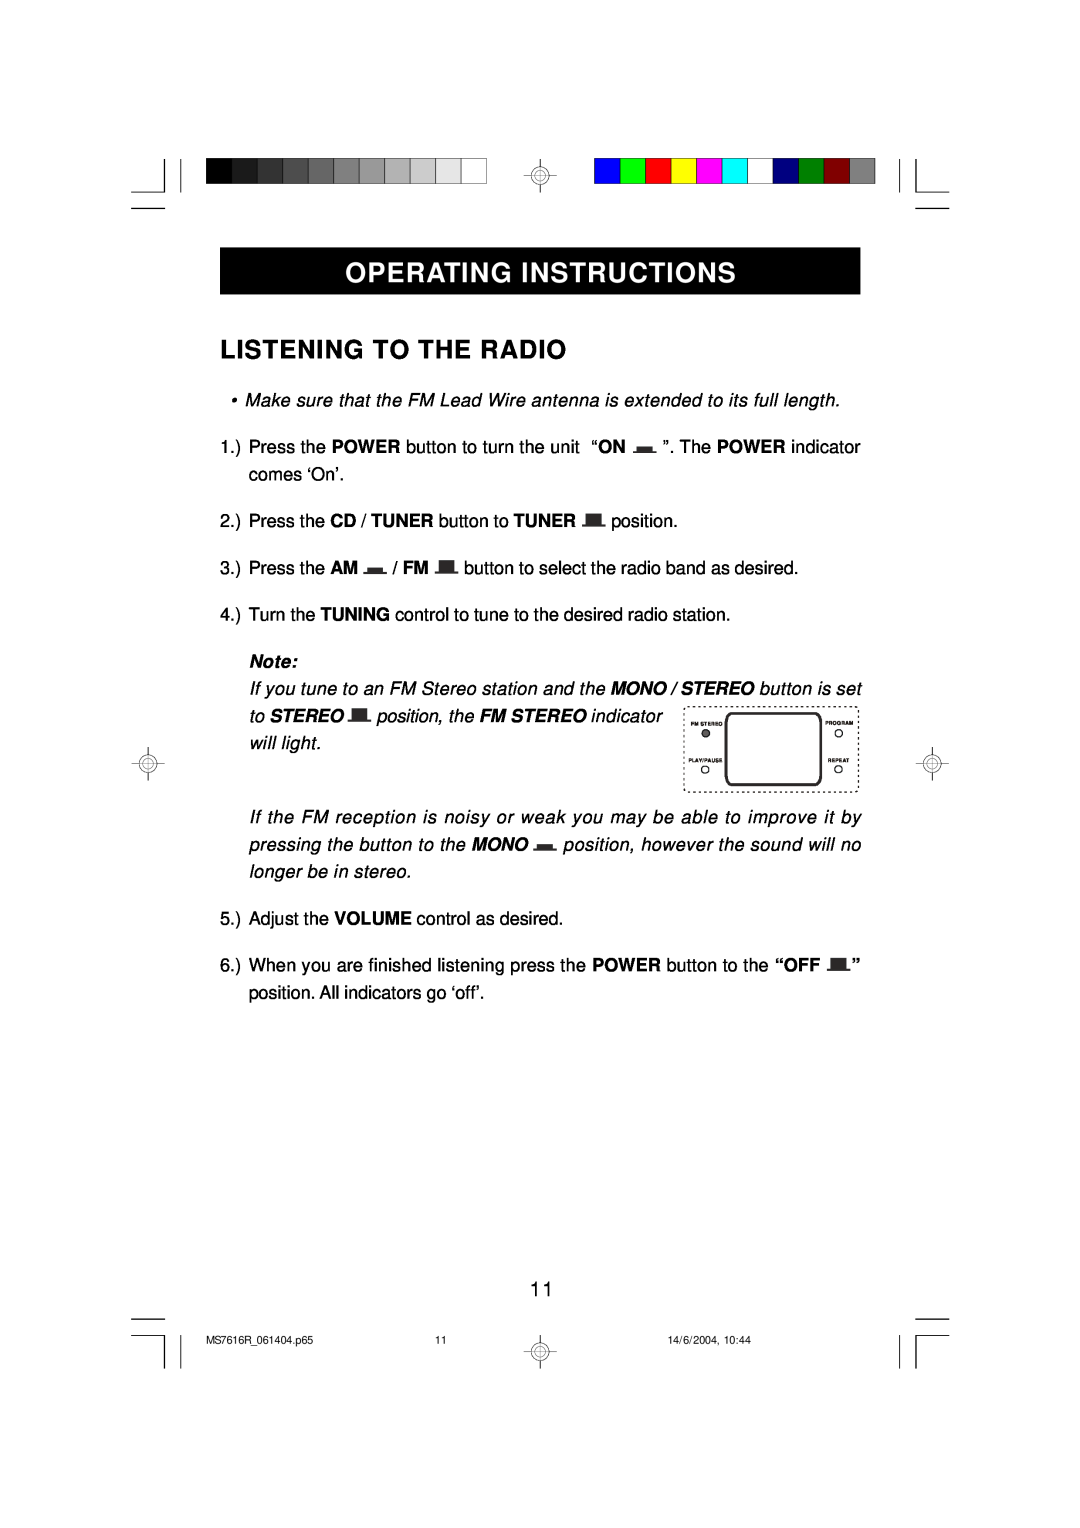 Emerson MS7616R owner manual Operating Instructions, Listening To The Radio, will light 